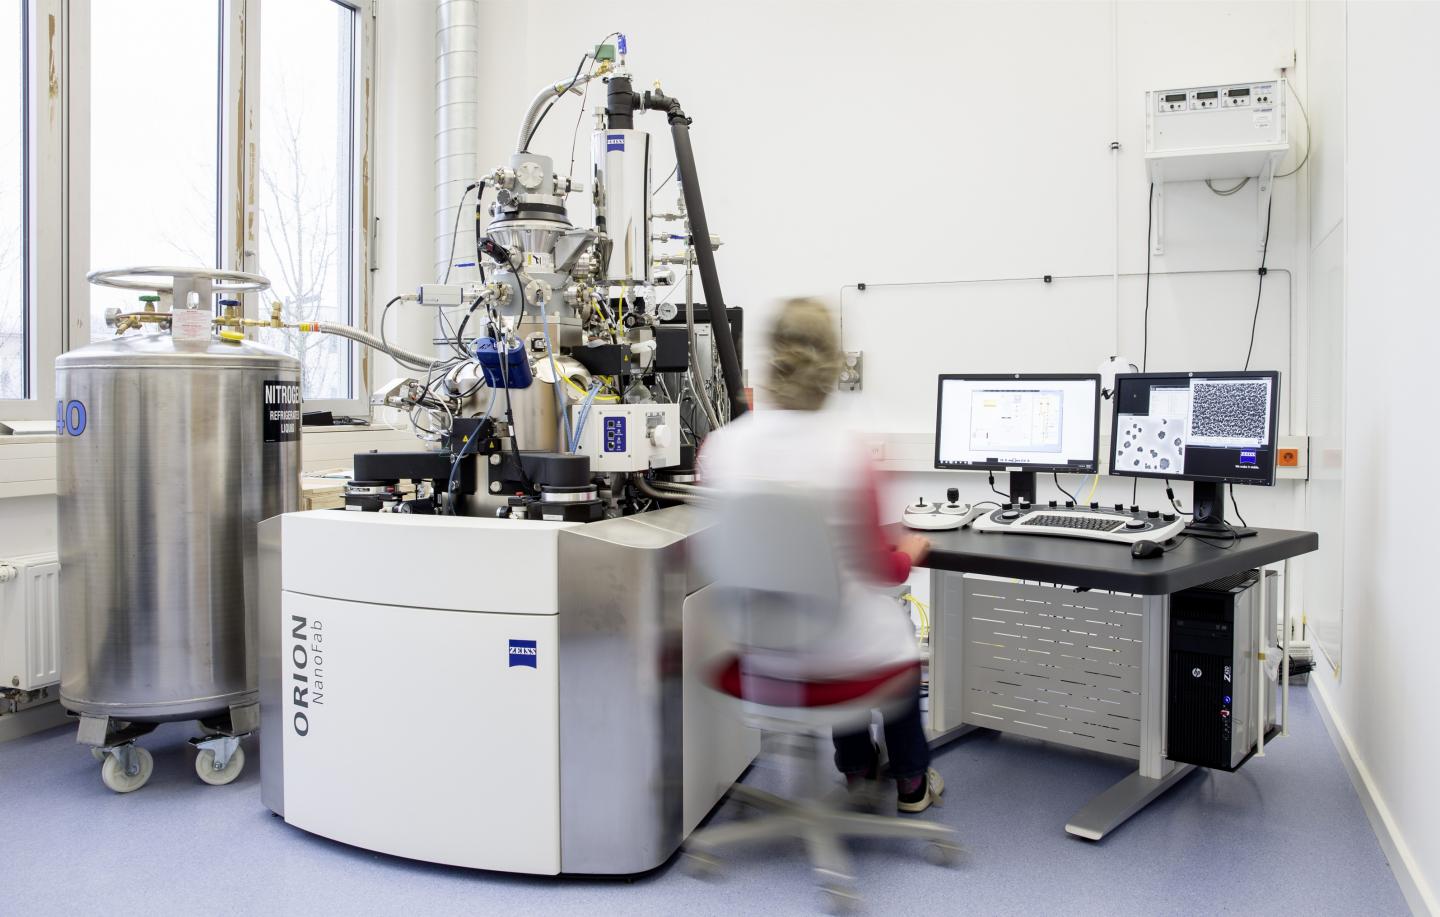 HZDR's Ion Microscope Plays a Crucial Role for the Production of Single Electron Transistors